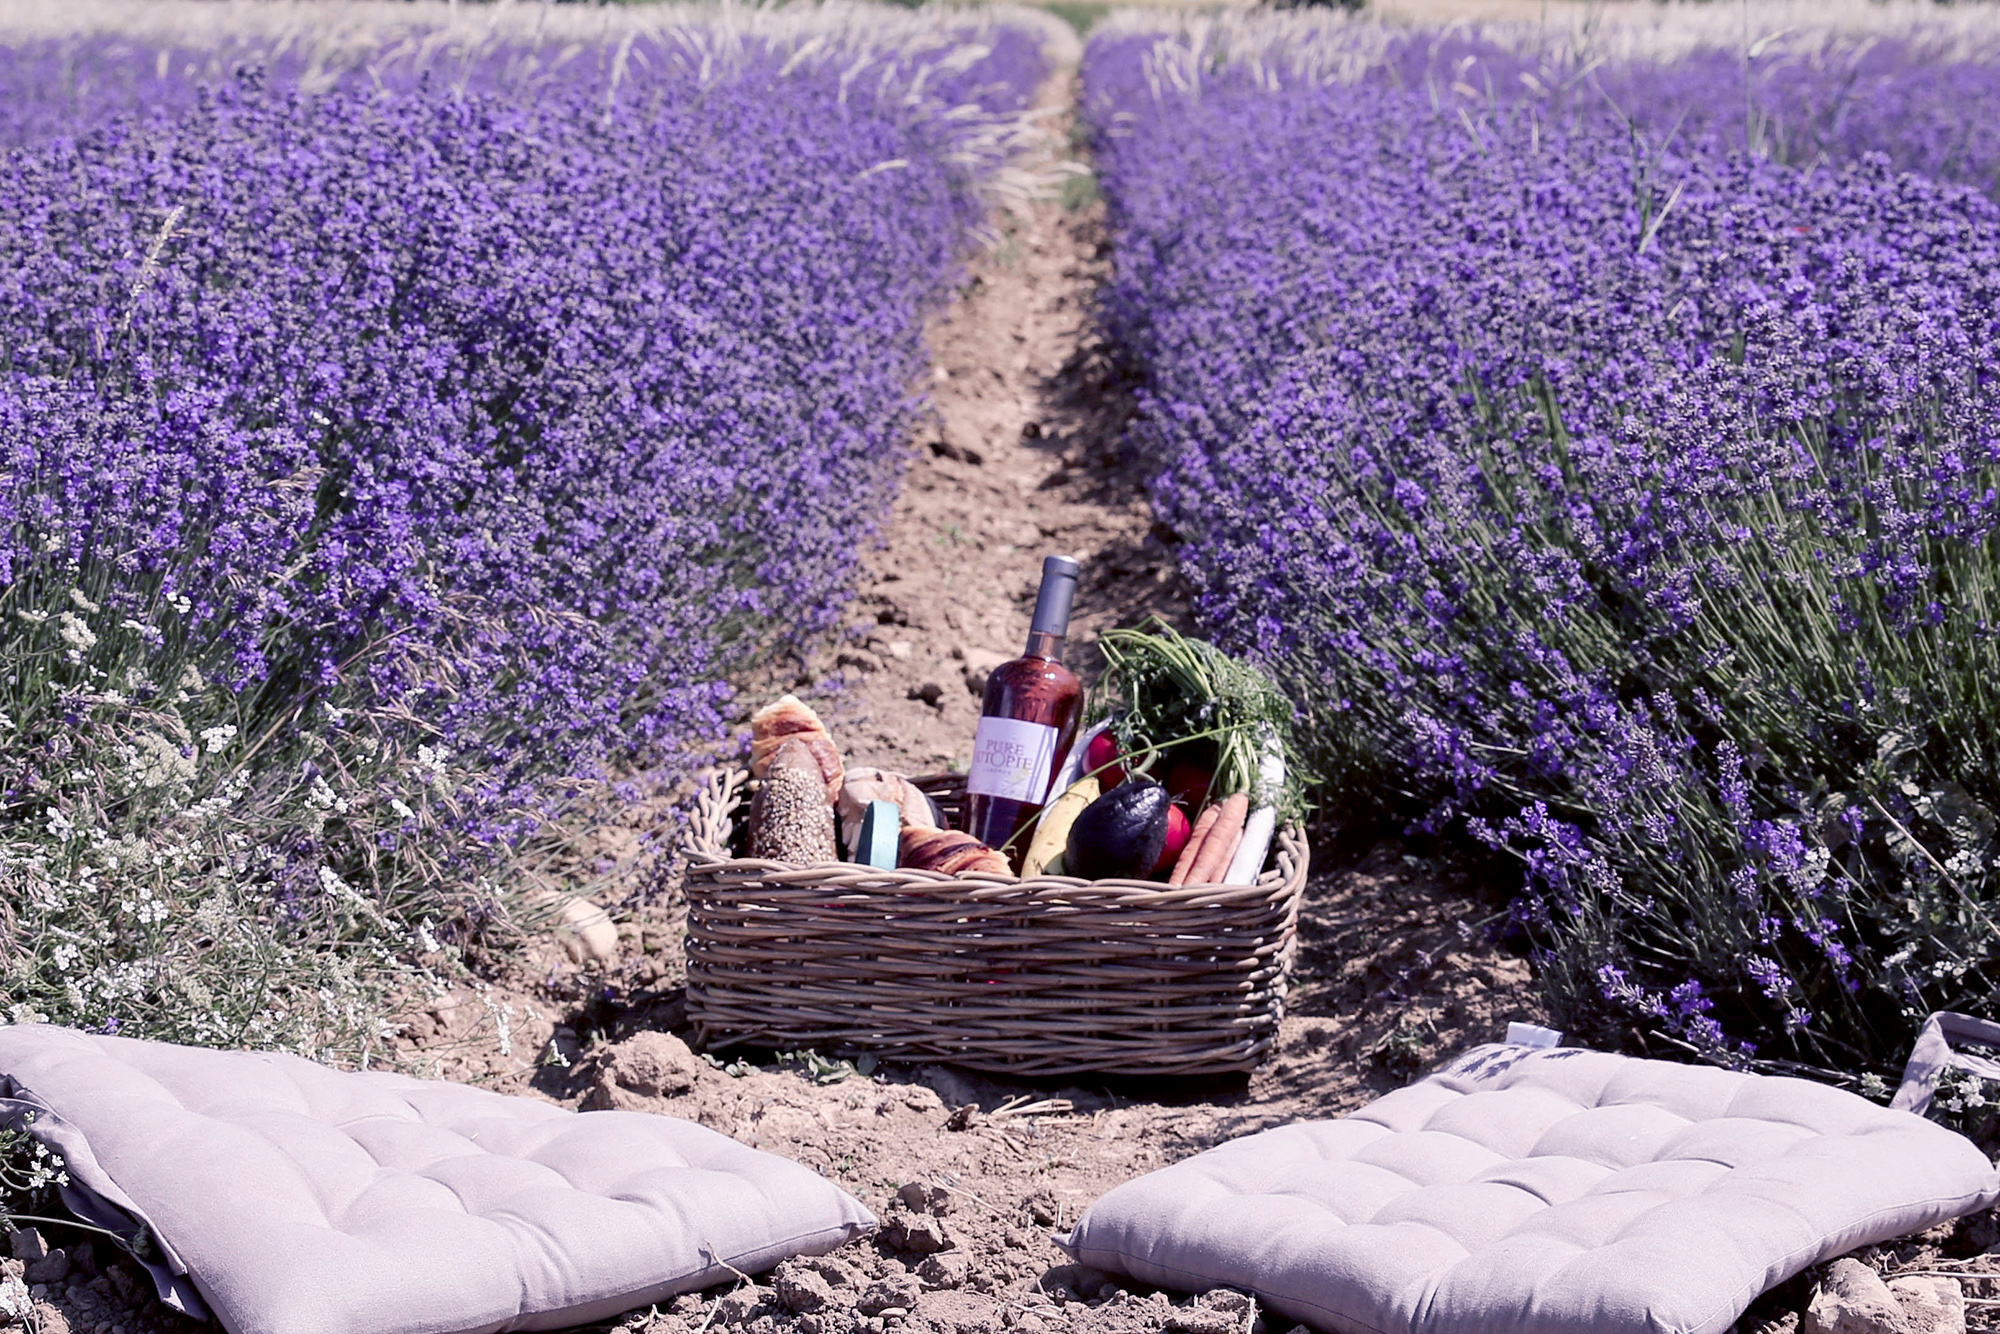 Wildluxe: Sault, France - Exploring the Enchanting Village of Lavender.